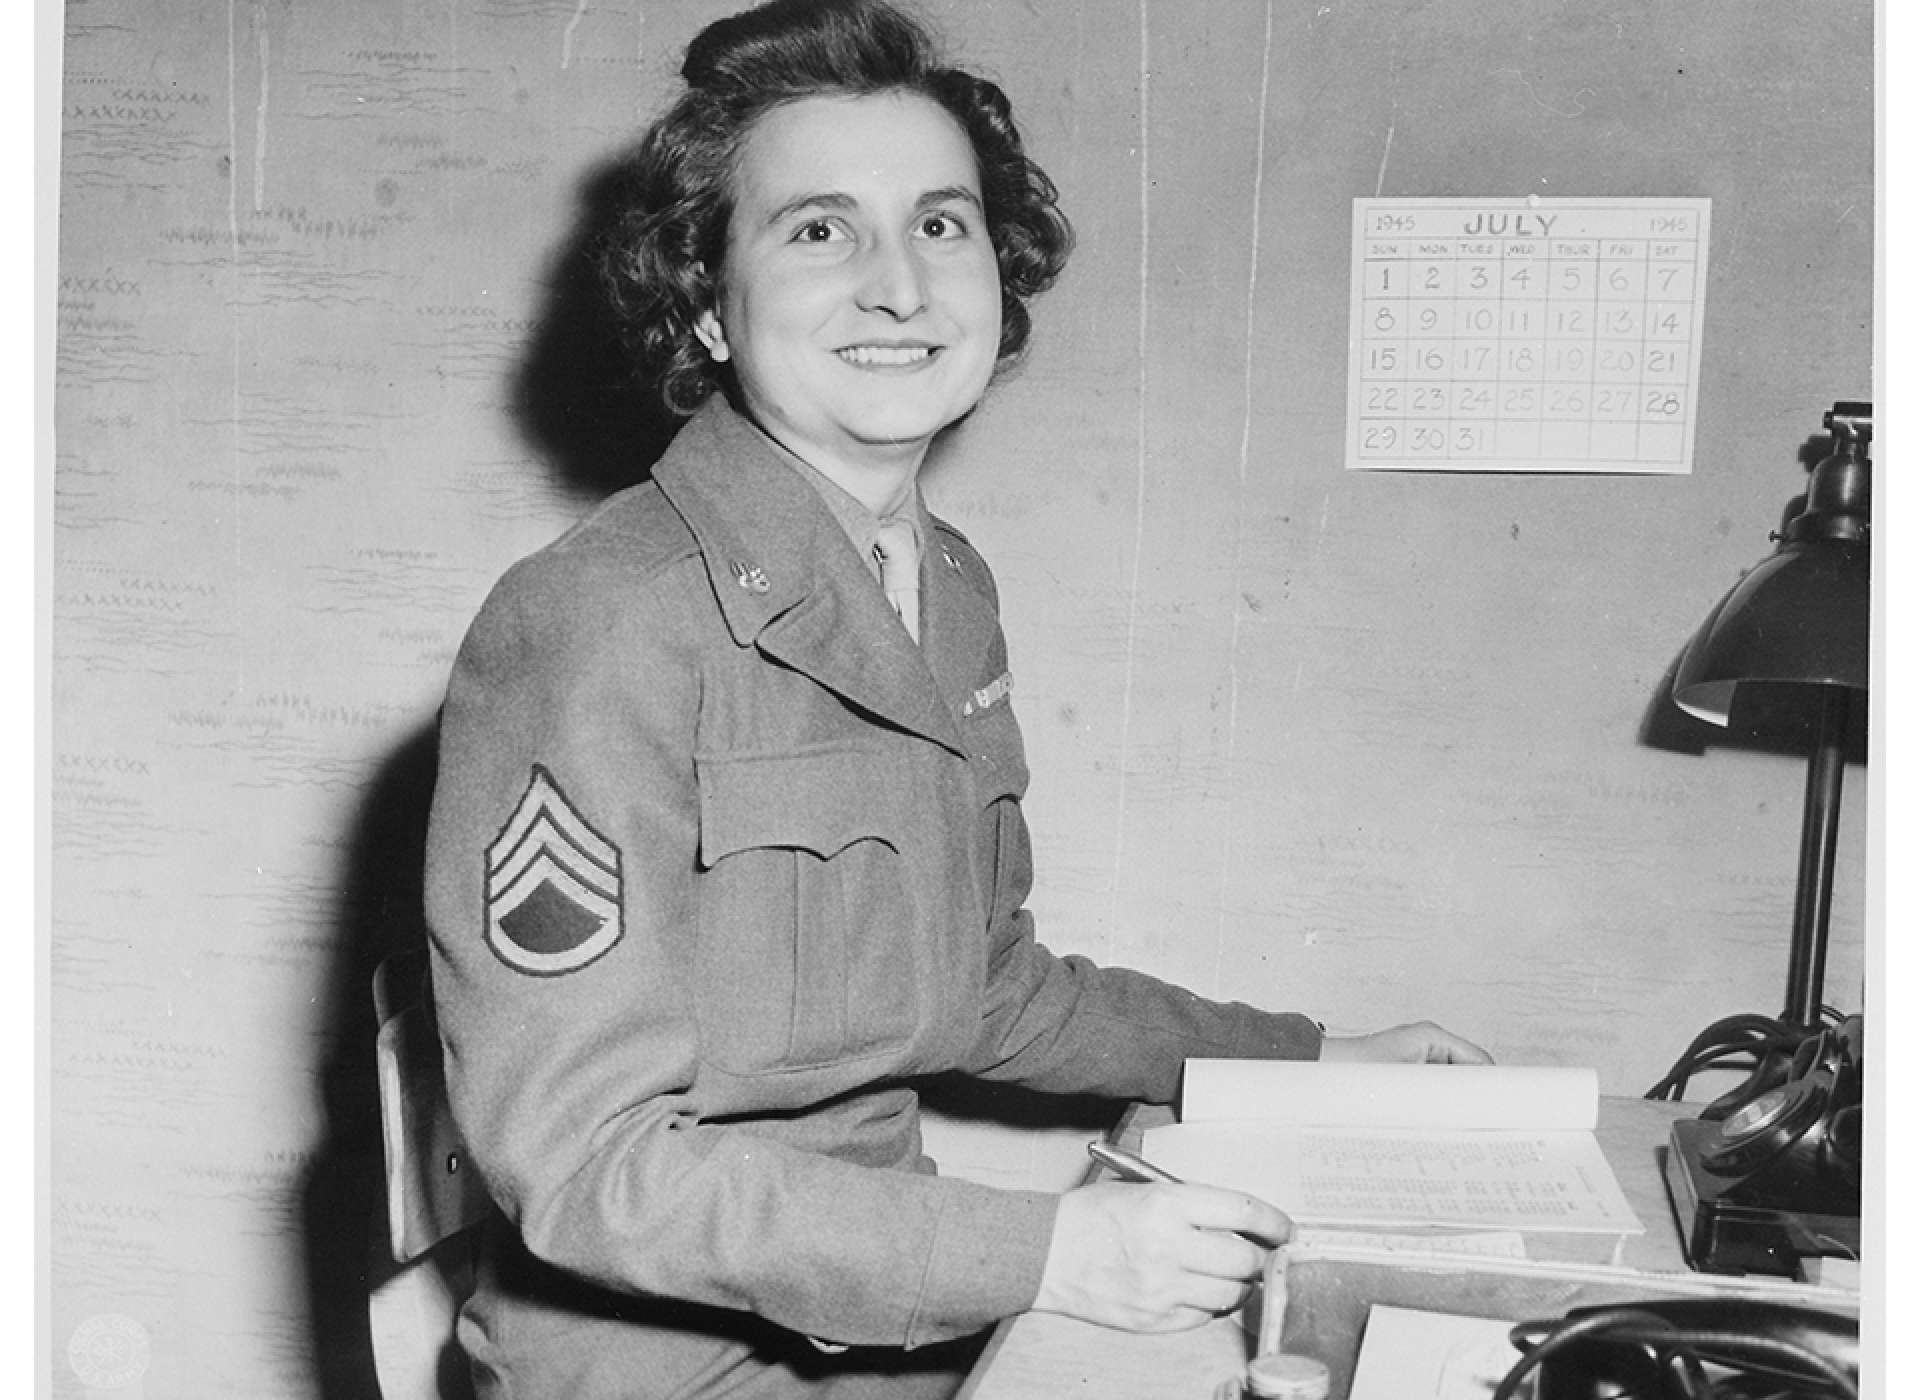 S. Sgt. Edith Royer